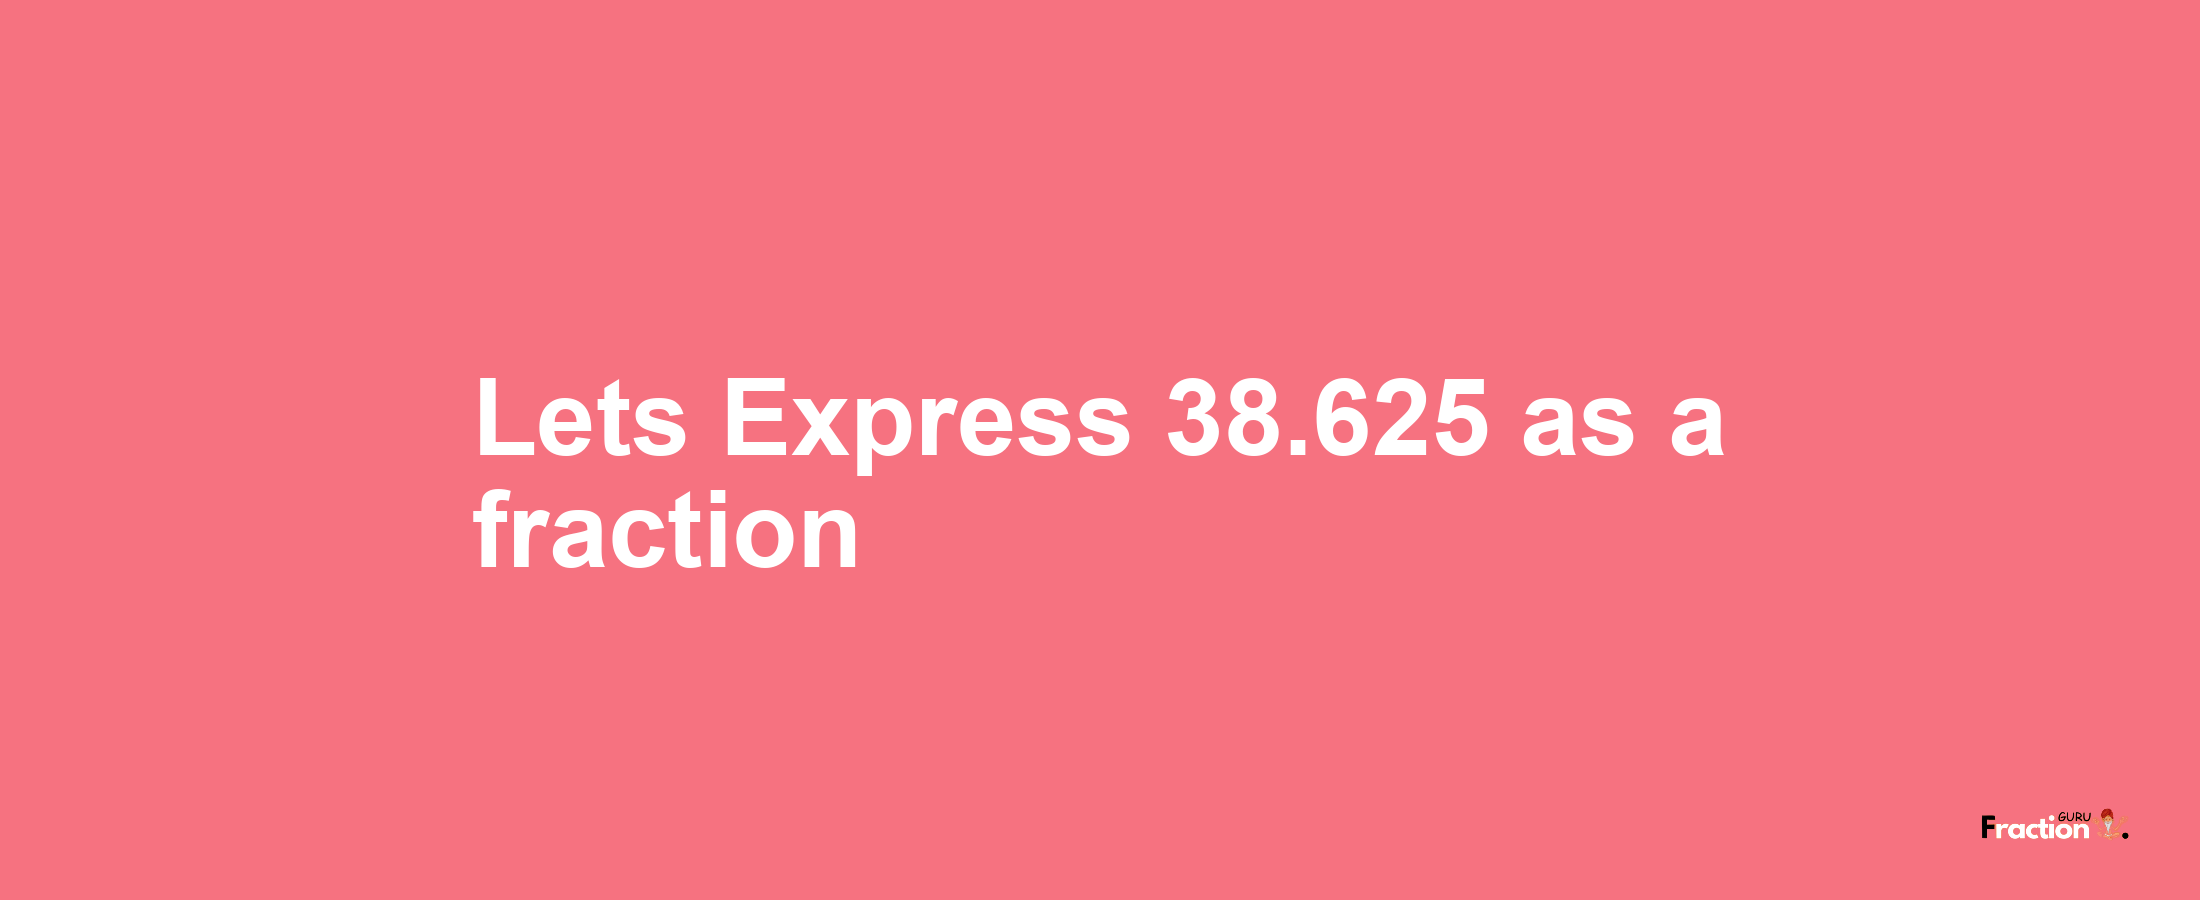 Lets Express 38.625 as afraction